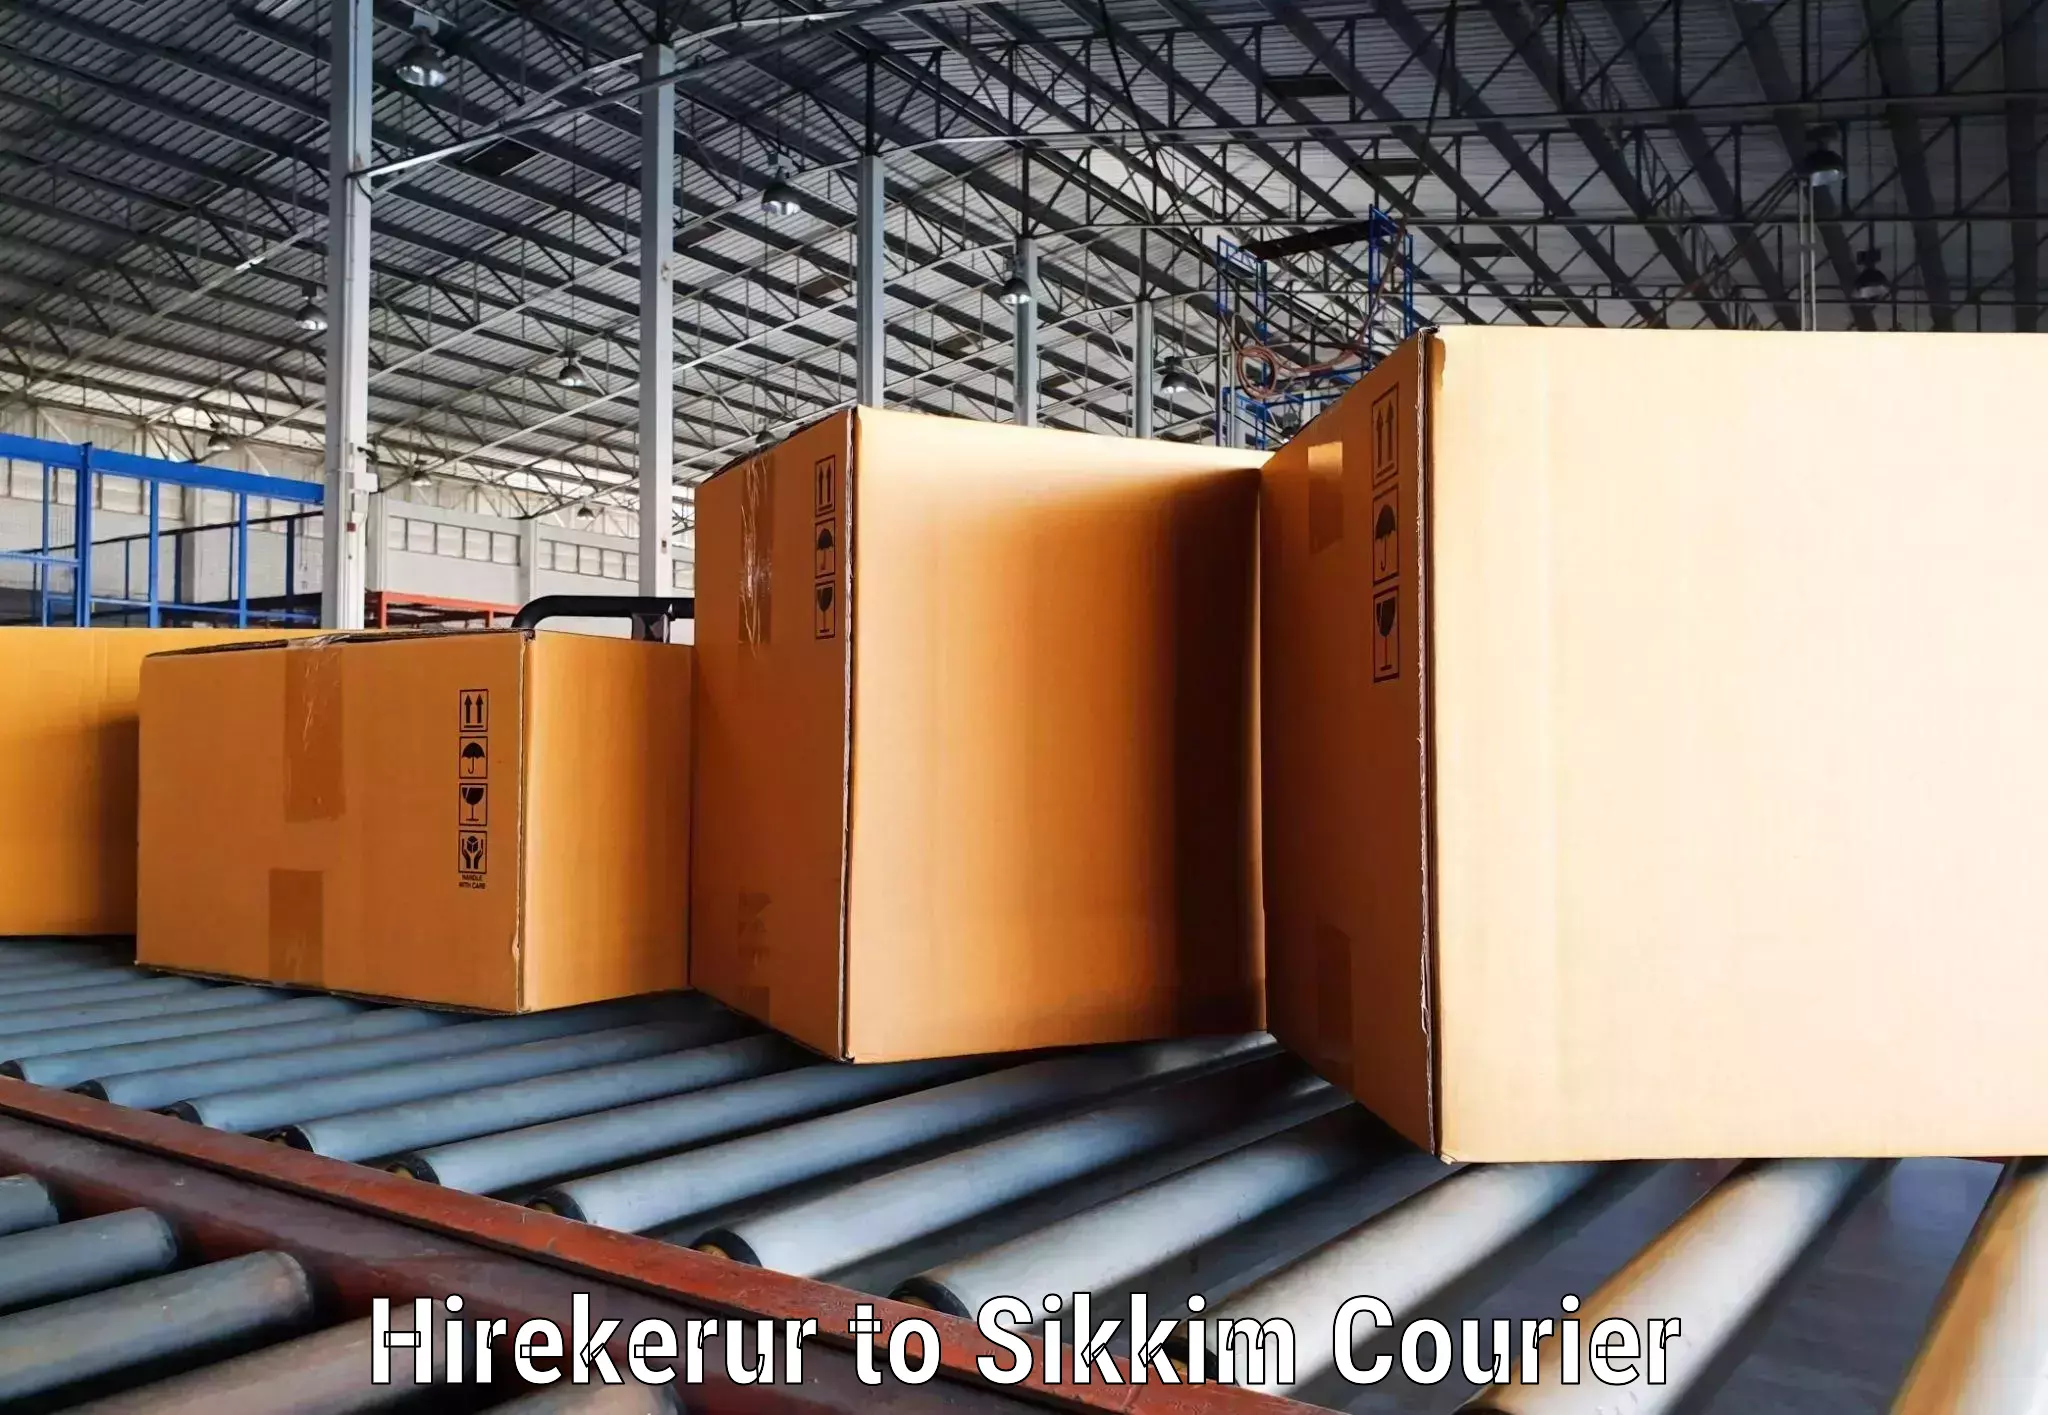 Express shipping in Hirekerur to Pelling